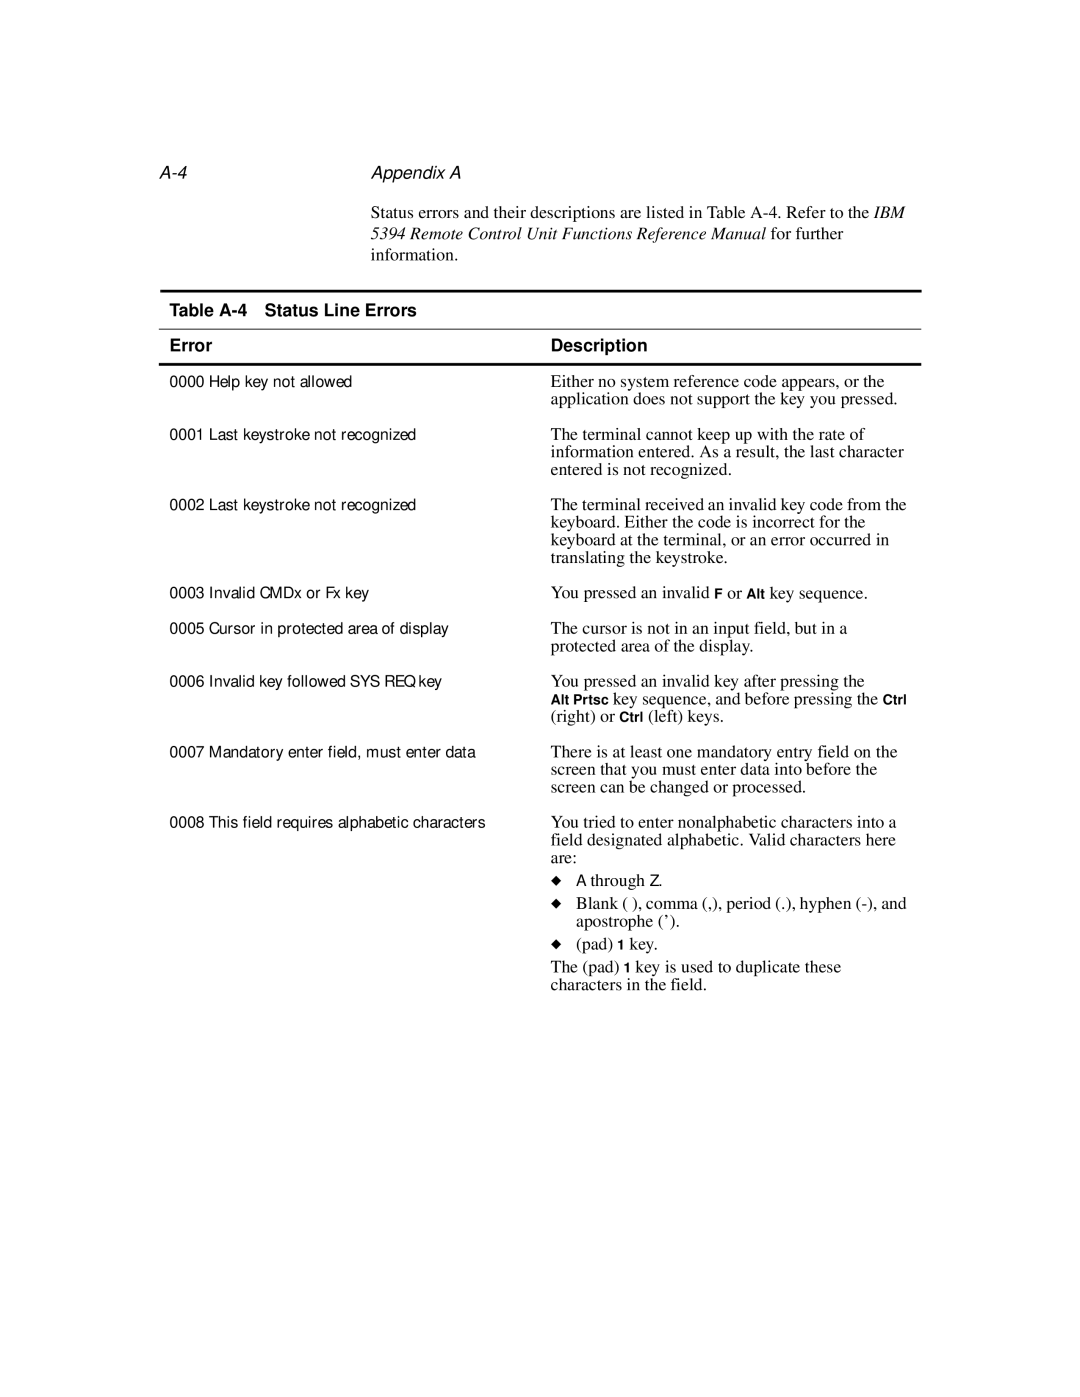 IBM TN5250 manual Appendix A, Remote Control Unit Functions Reference Manual for further 